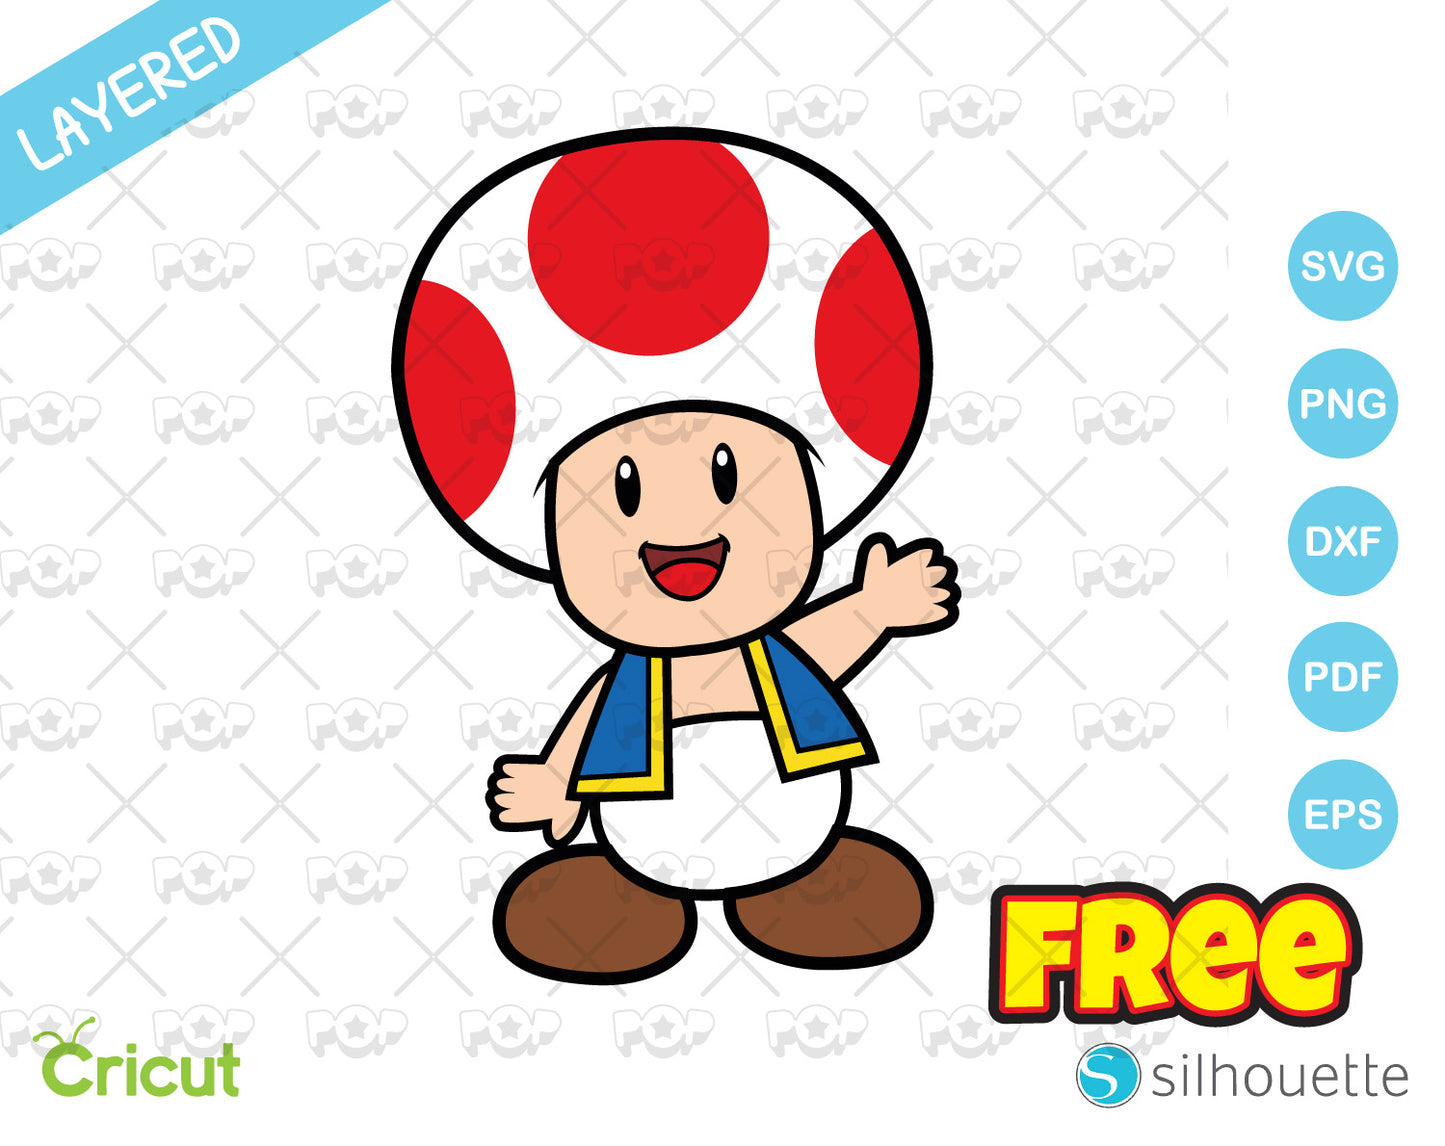 FREE Super Mario clipart, SVG cutting files for cricut silhouette, SVG, PNG, DXF, instant download